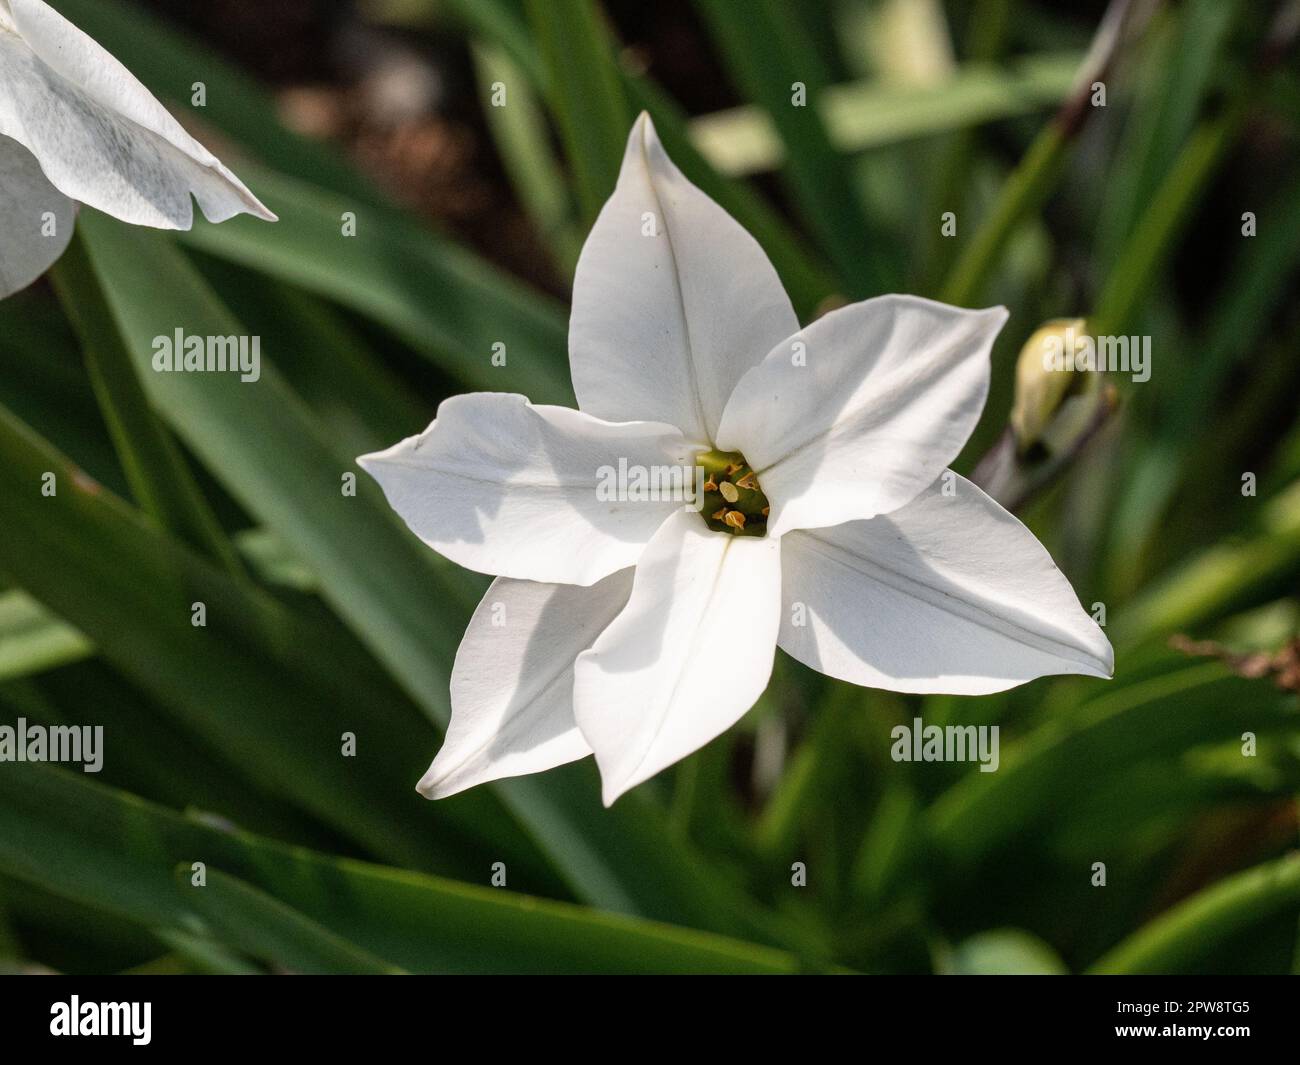 The pure white starry flowers of the early flowering Ipheion 'Alberto Castillo Stock Photo